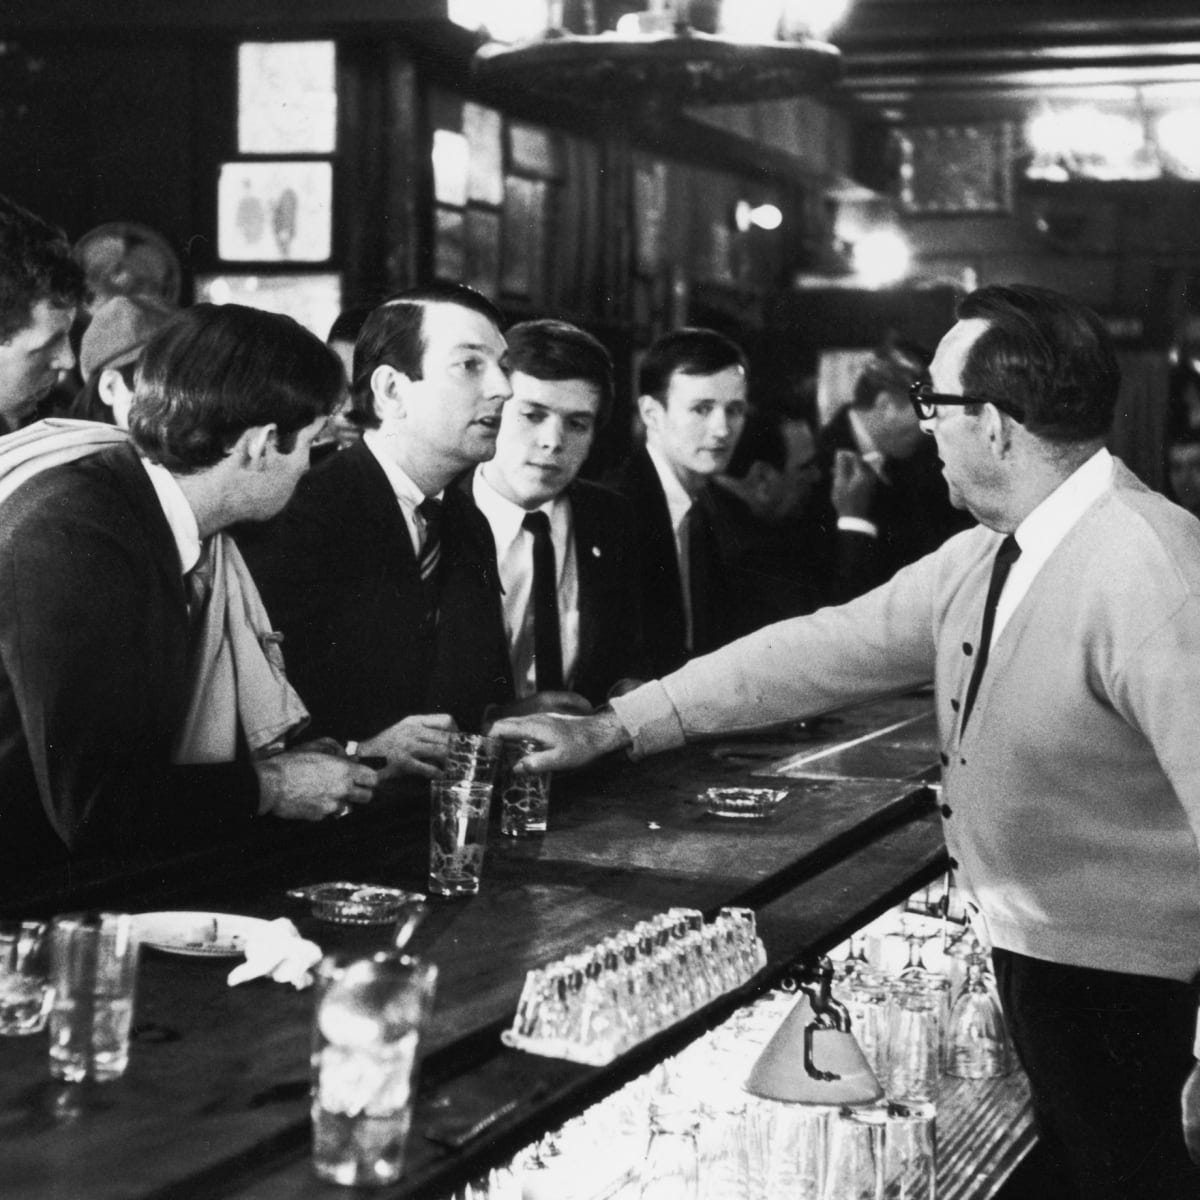 A group of white men in suits stare down a white bartender putting his hand over the glass of a beer he's just served them.